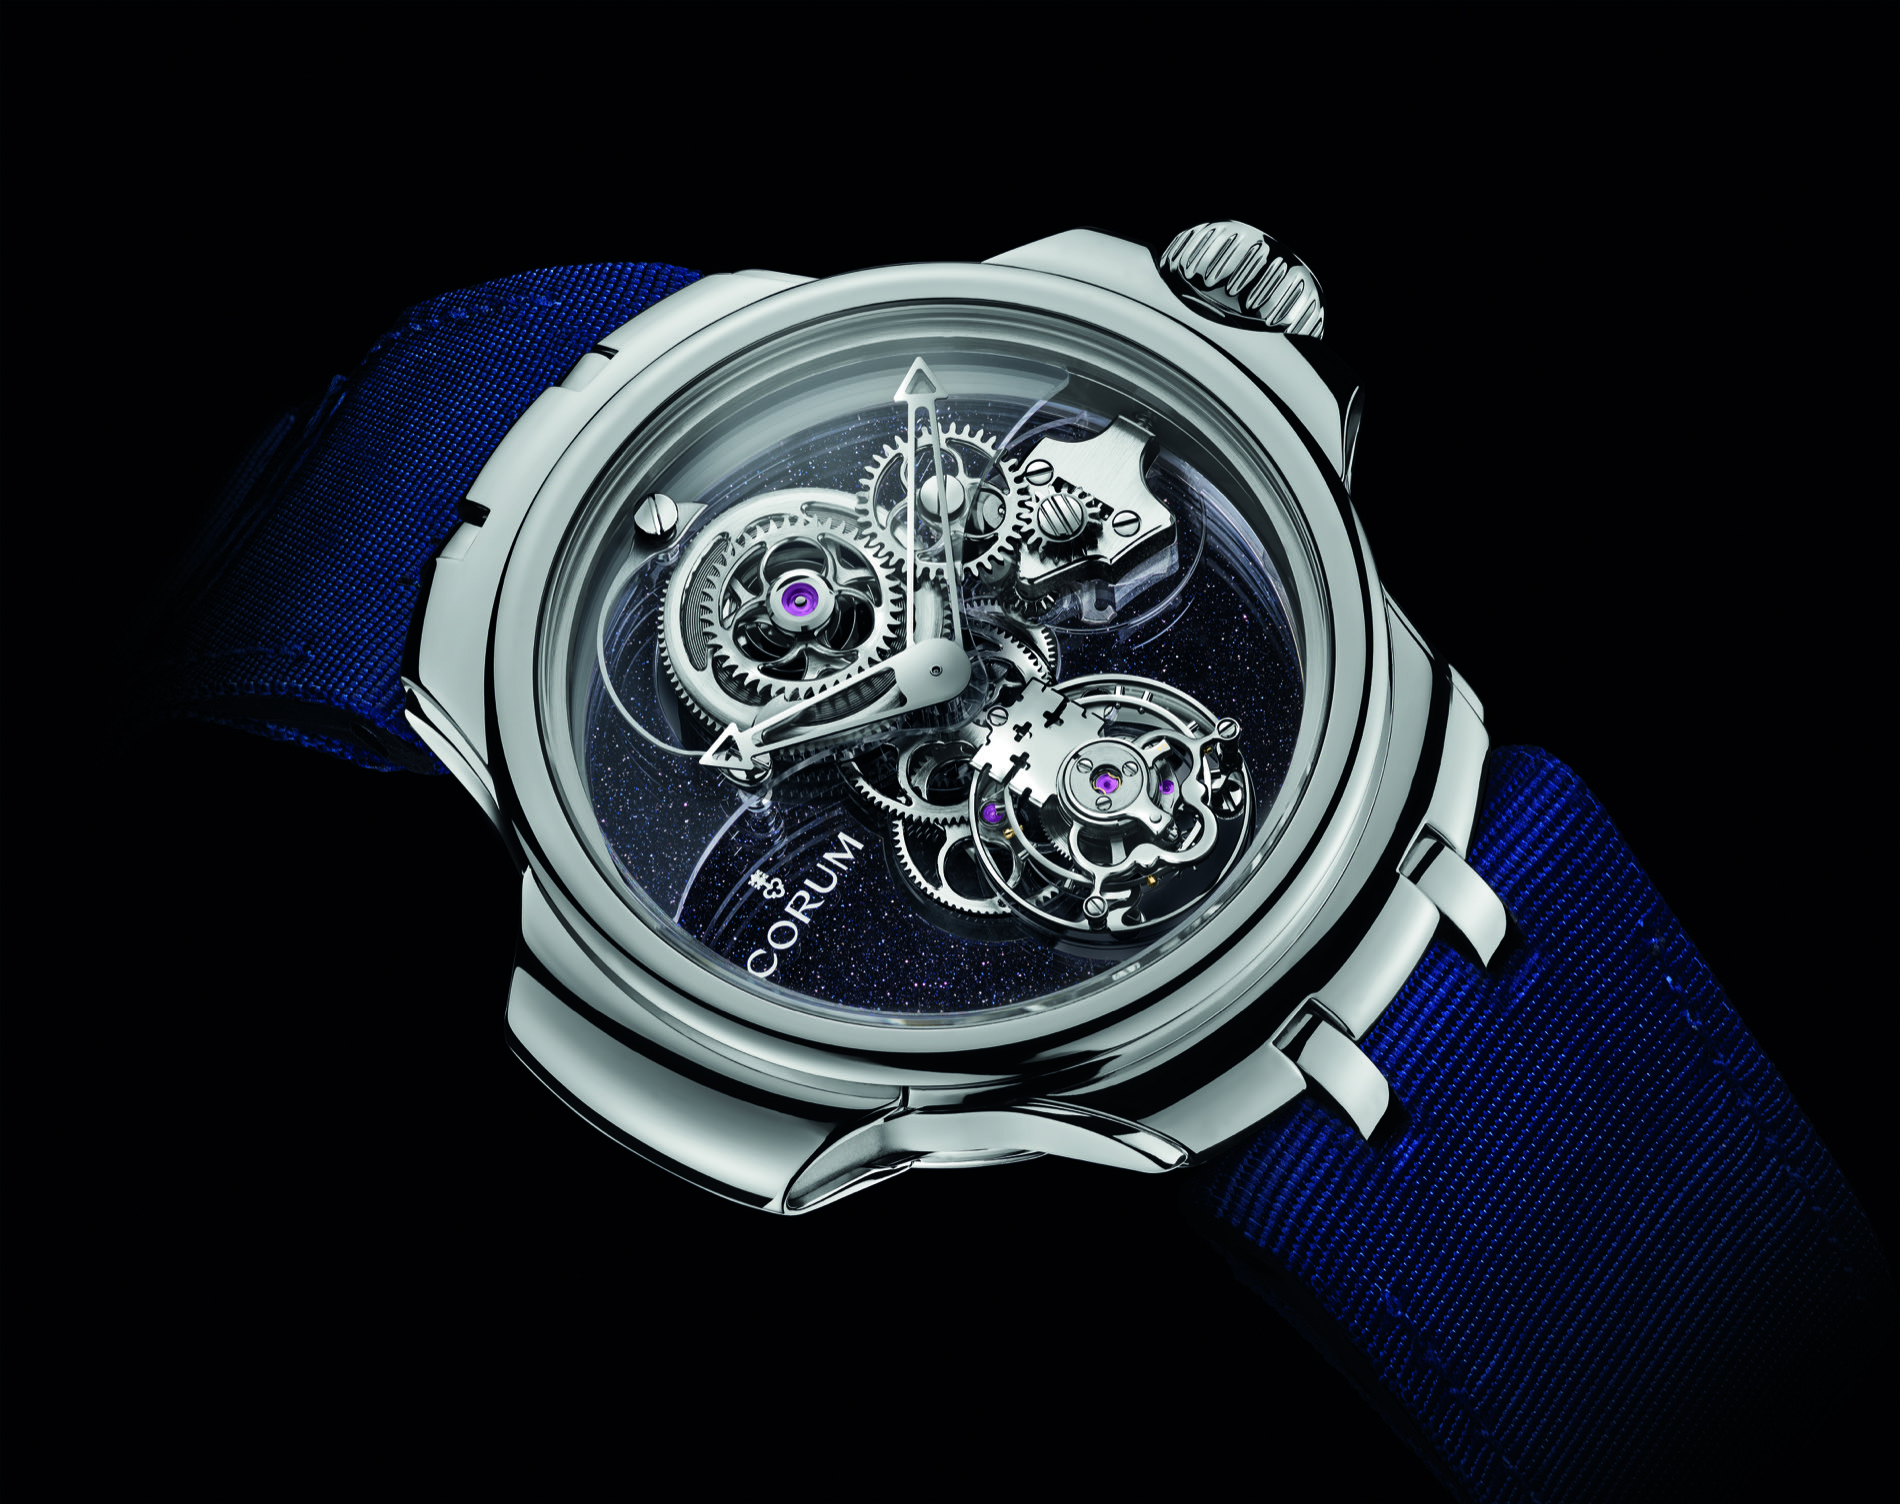 The Corum Concept swings for the fences -